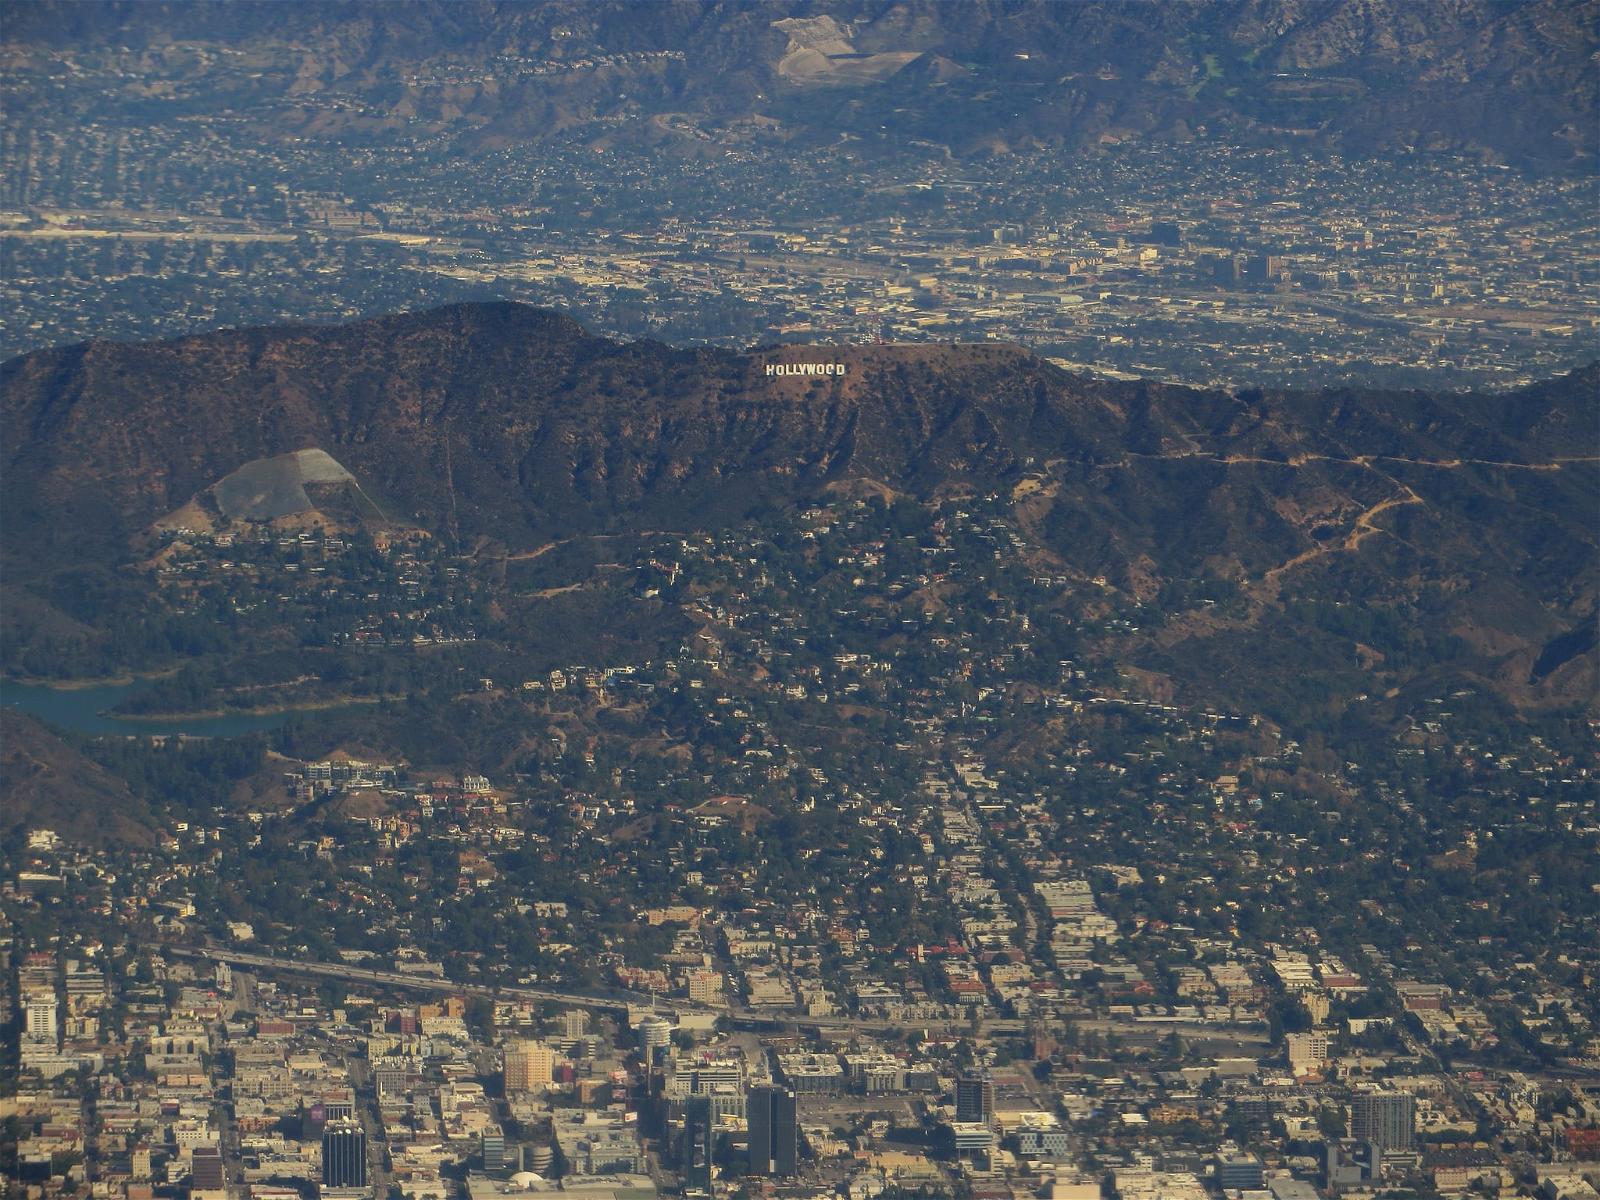 Image of Hollywood Sign. 